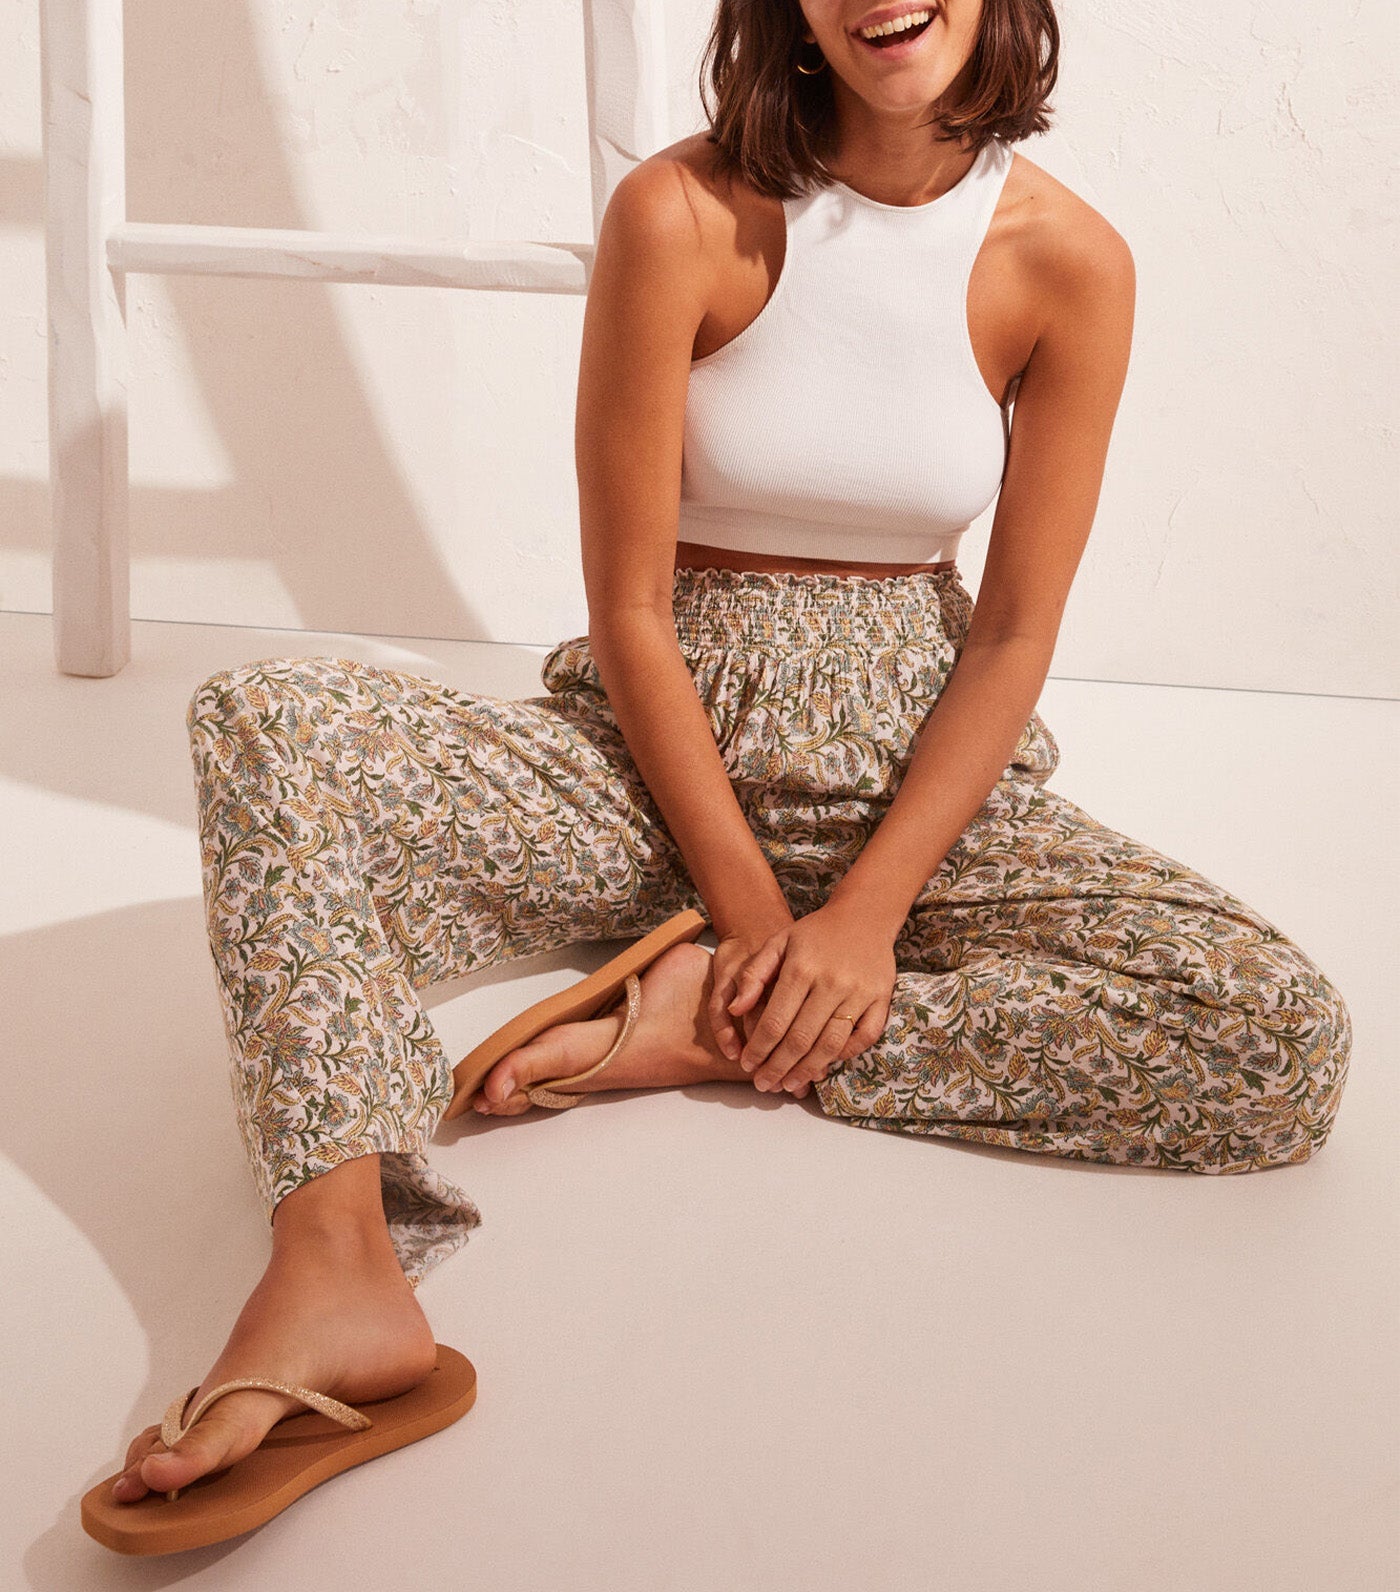 Long Printed Trousers Floral Green